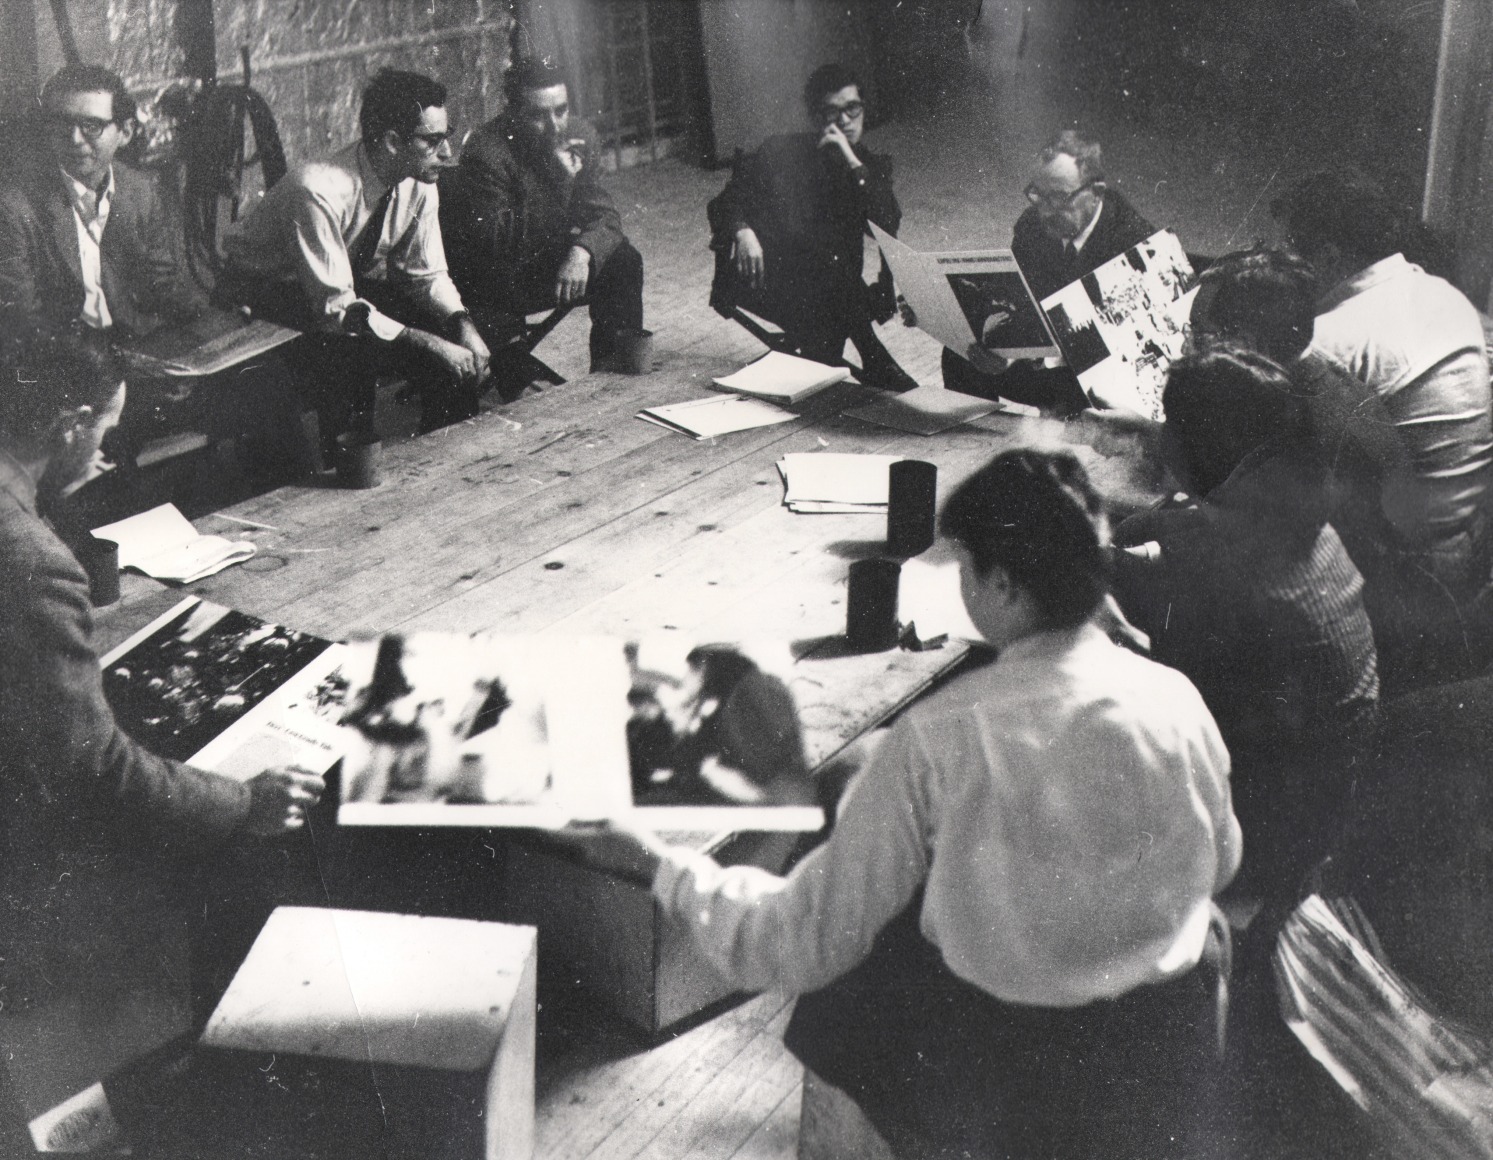 03. David Attie, Brodovitch Design Laboratory, Richard Avedon's Studio, c. 1957. A group of at least ten people sit in a circle on a wooden floor, reviewing prints.